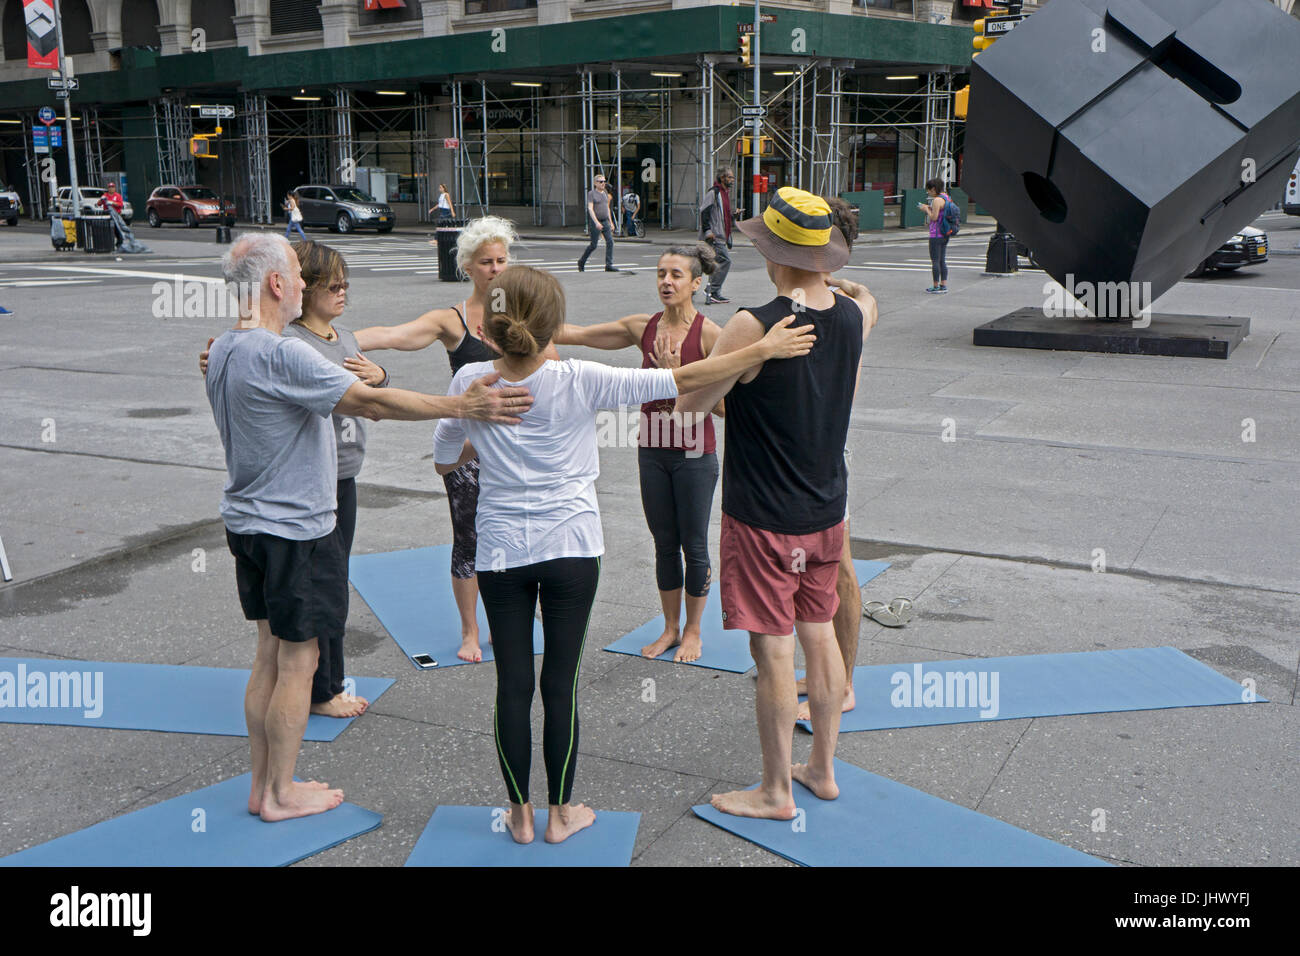 At the conclusion of an outdoor free yoga class the instructor (maroon top) leads the group in a moment of thought & prayer. On Astor Place in NYC Stock Photo